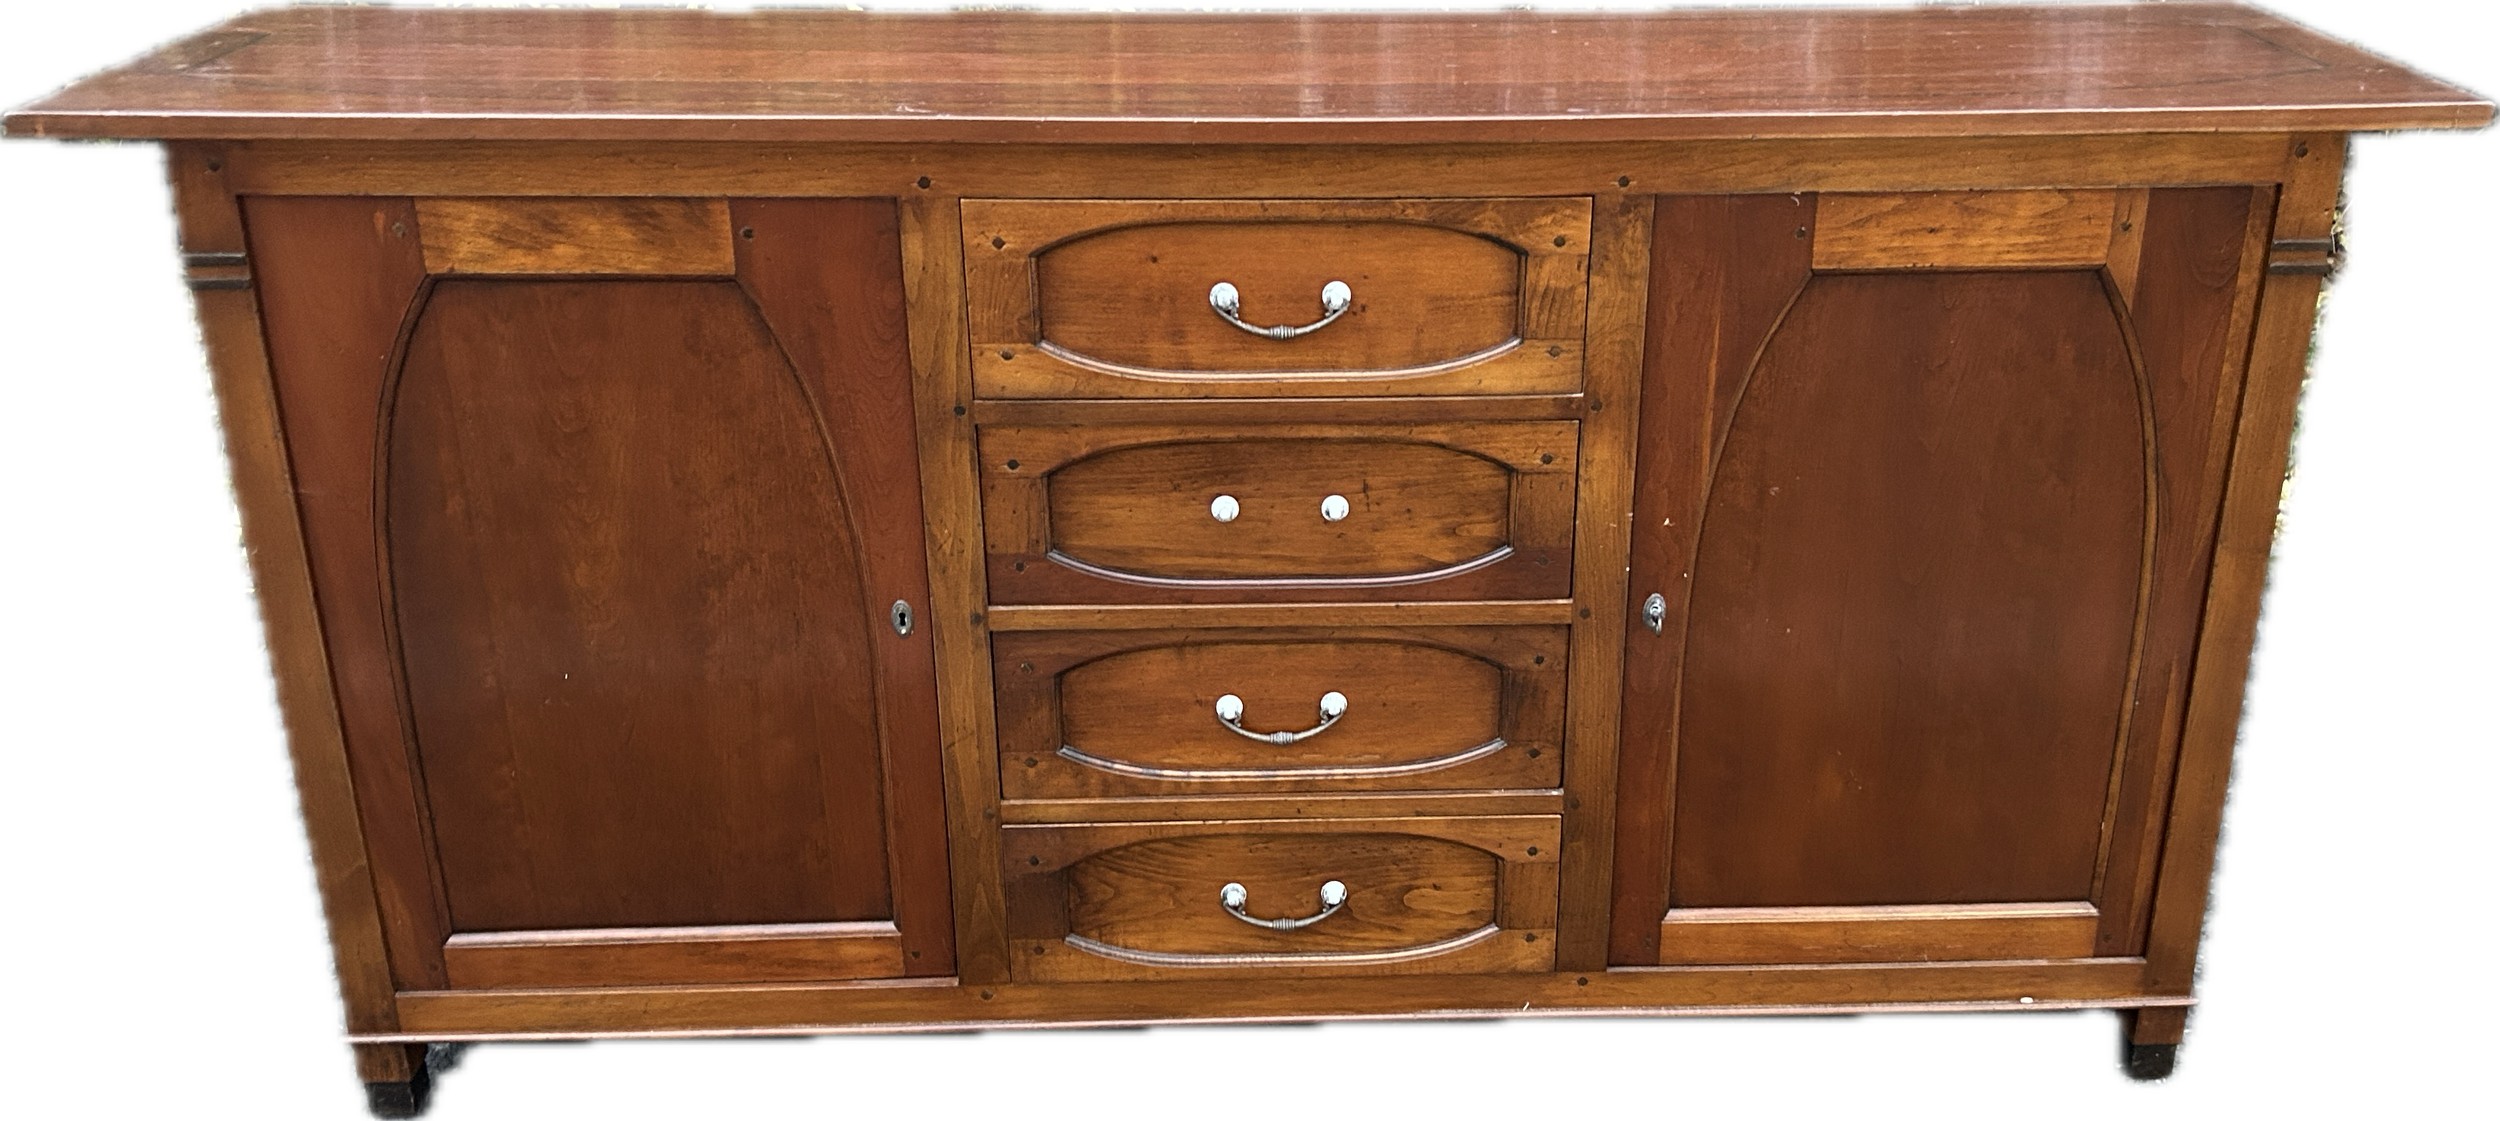 2 door 4 drawer cherry wood sideboard measures approximately 39 inches tall 79 inches wide 20 inches - Image 6 of 6